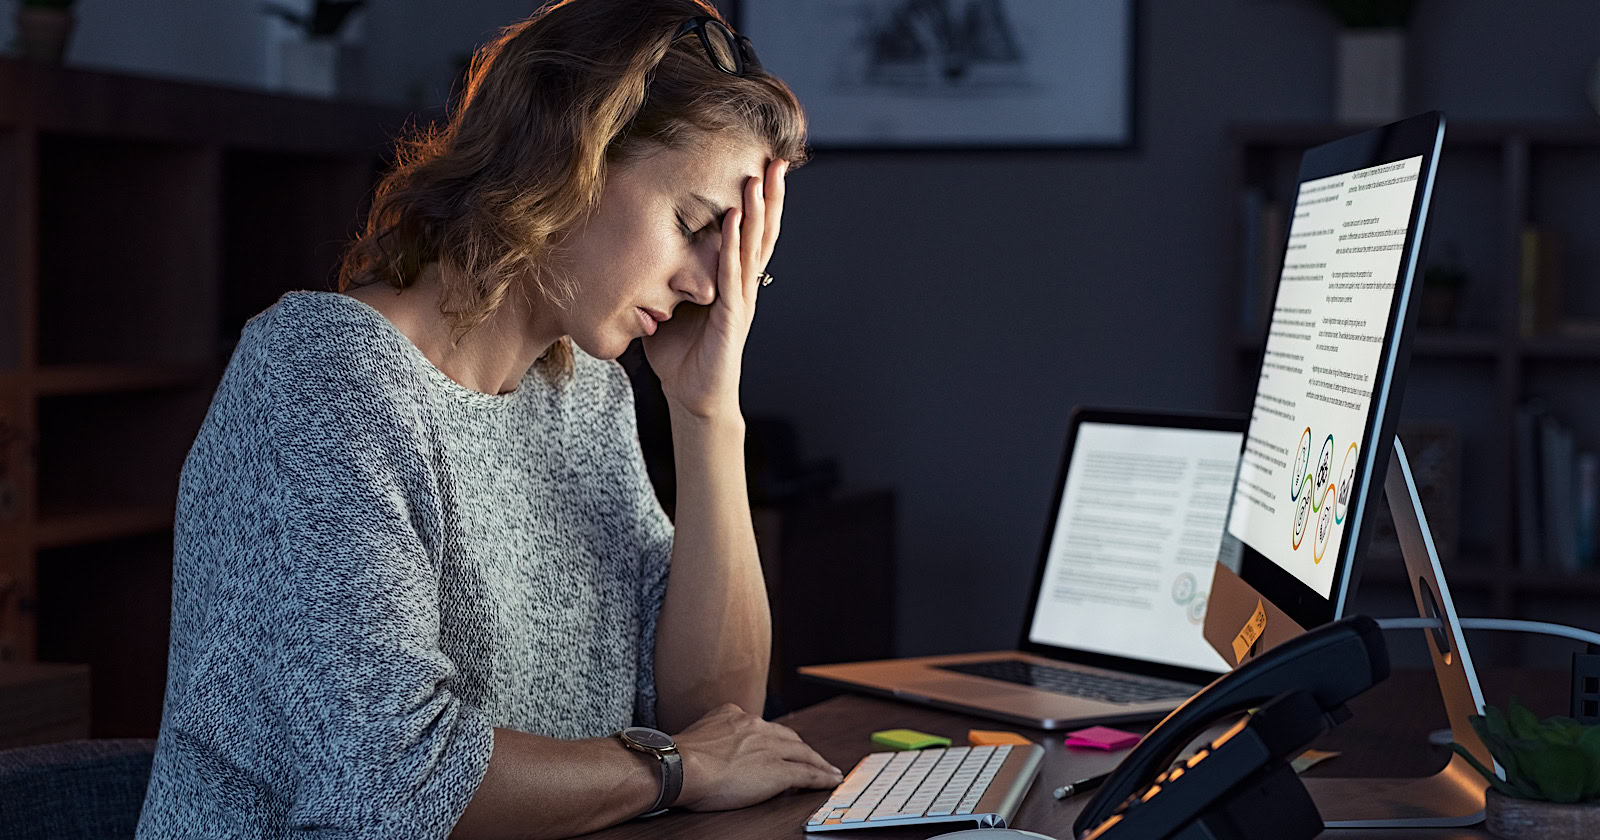 Mature and tired businesswoman working on computer until night. Portrait of a casual stressed lady with headache at desk.